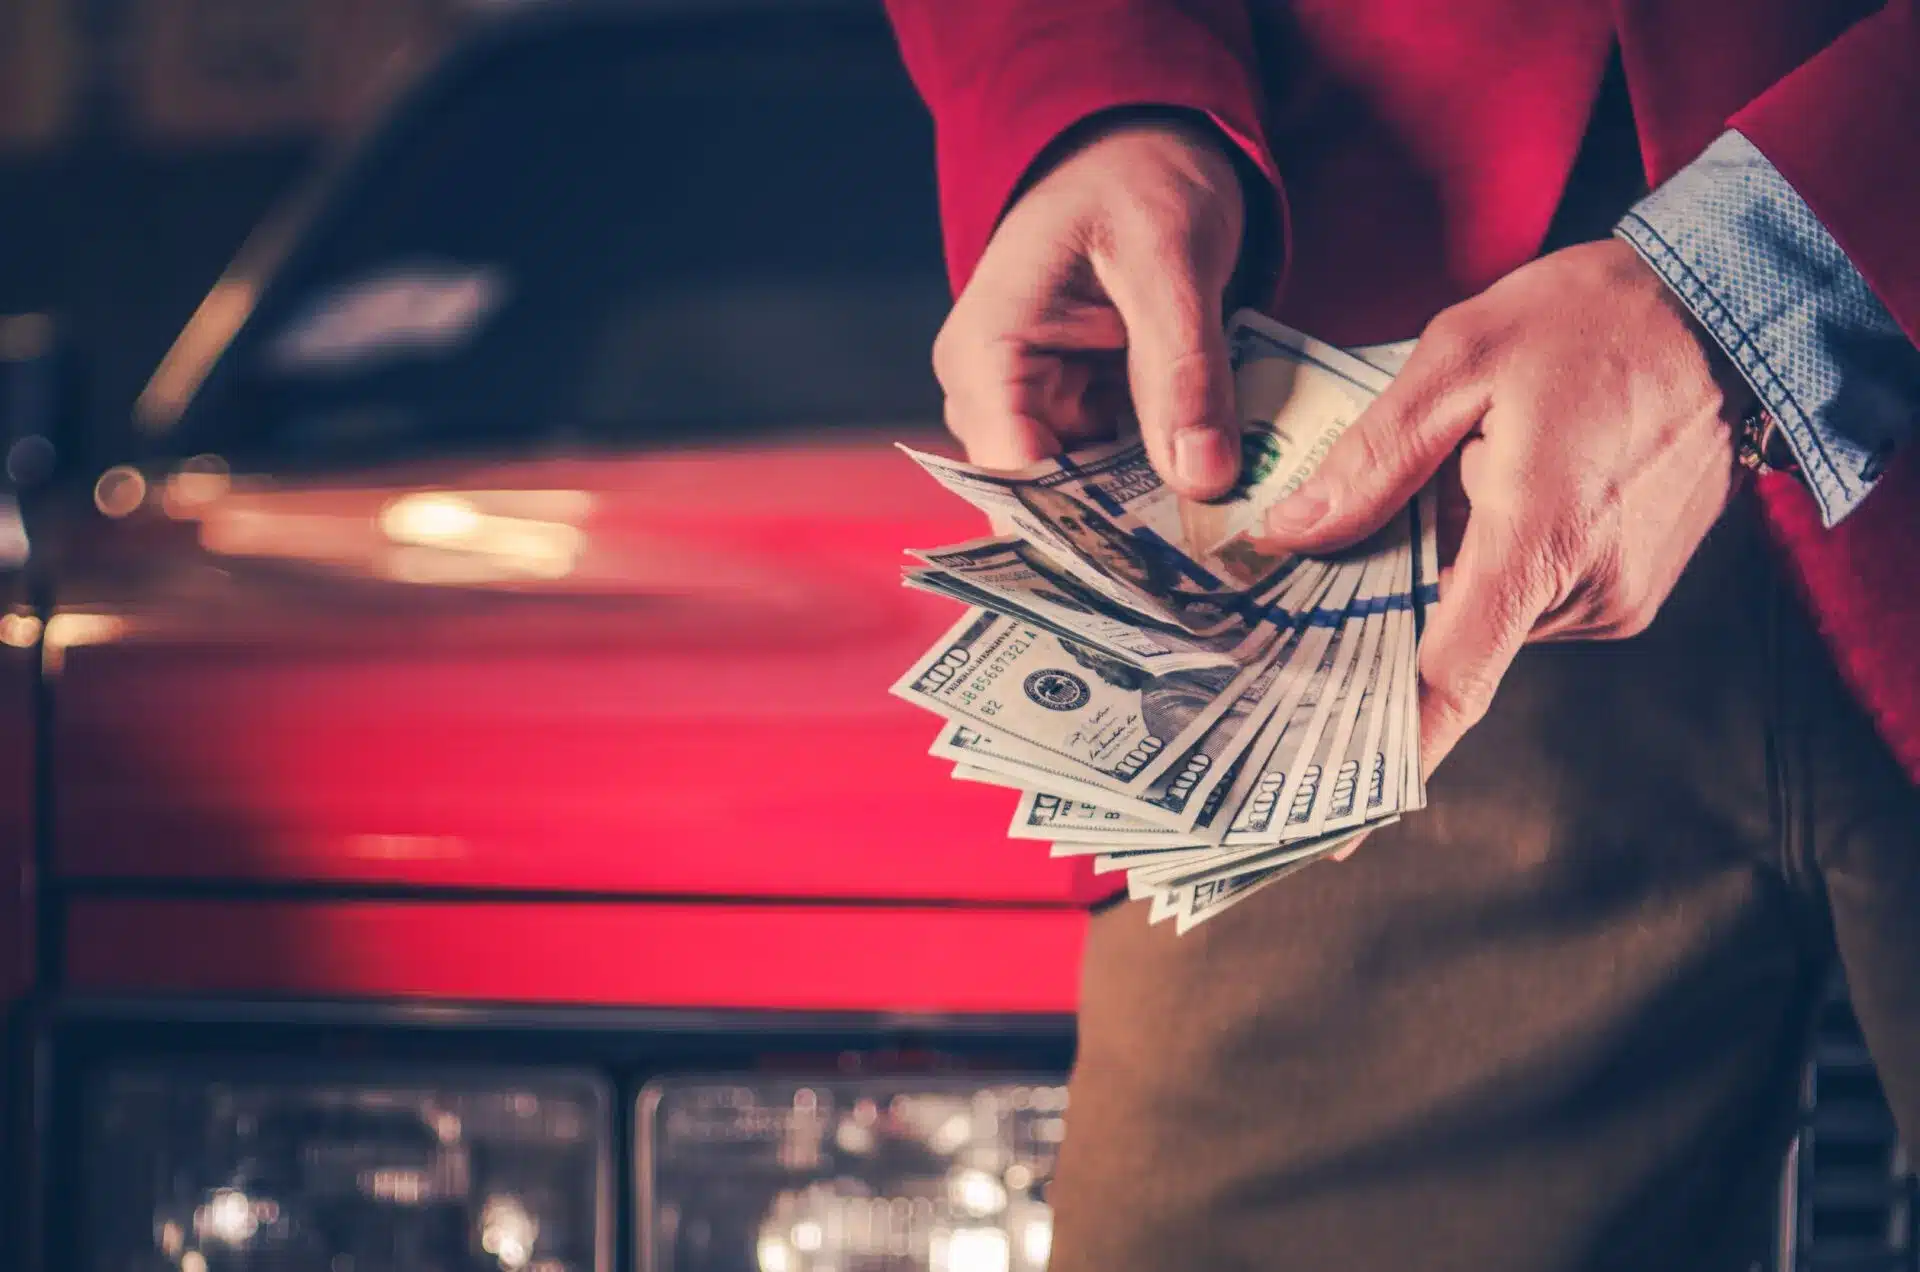 How To Sell Your Junk Car For Cash